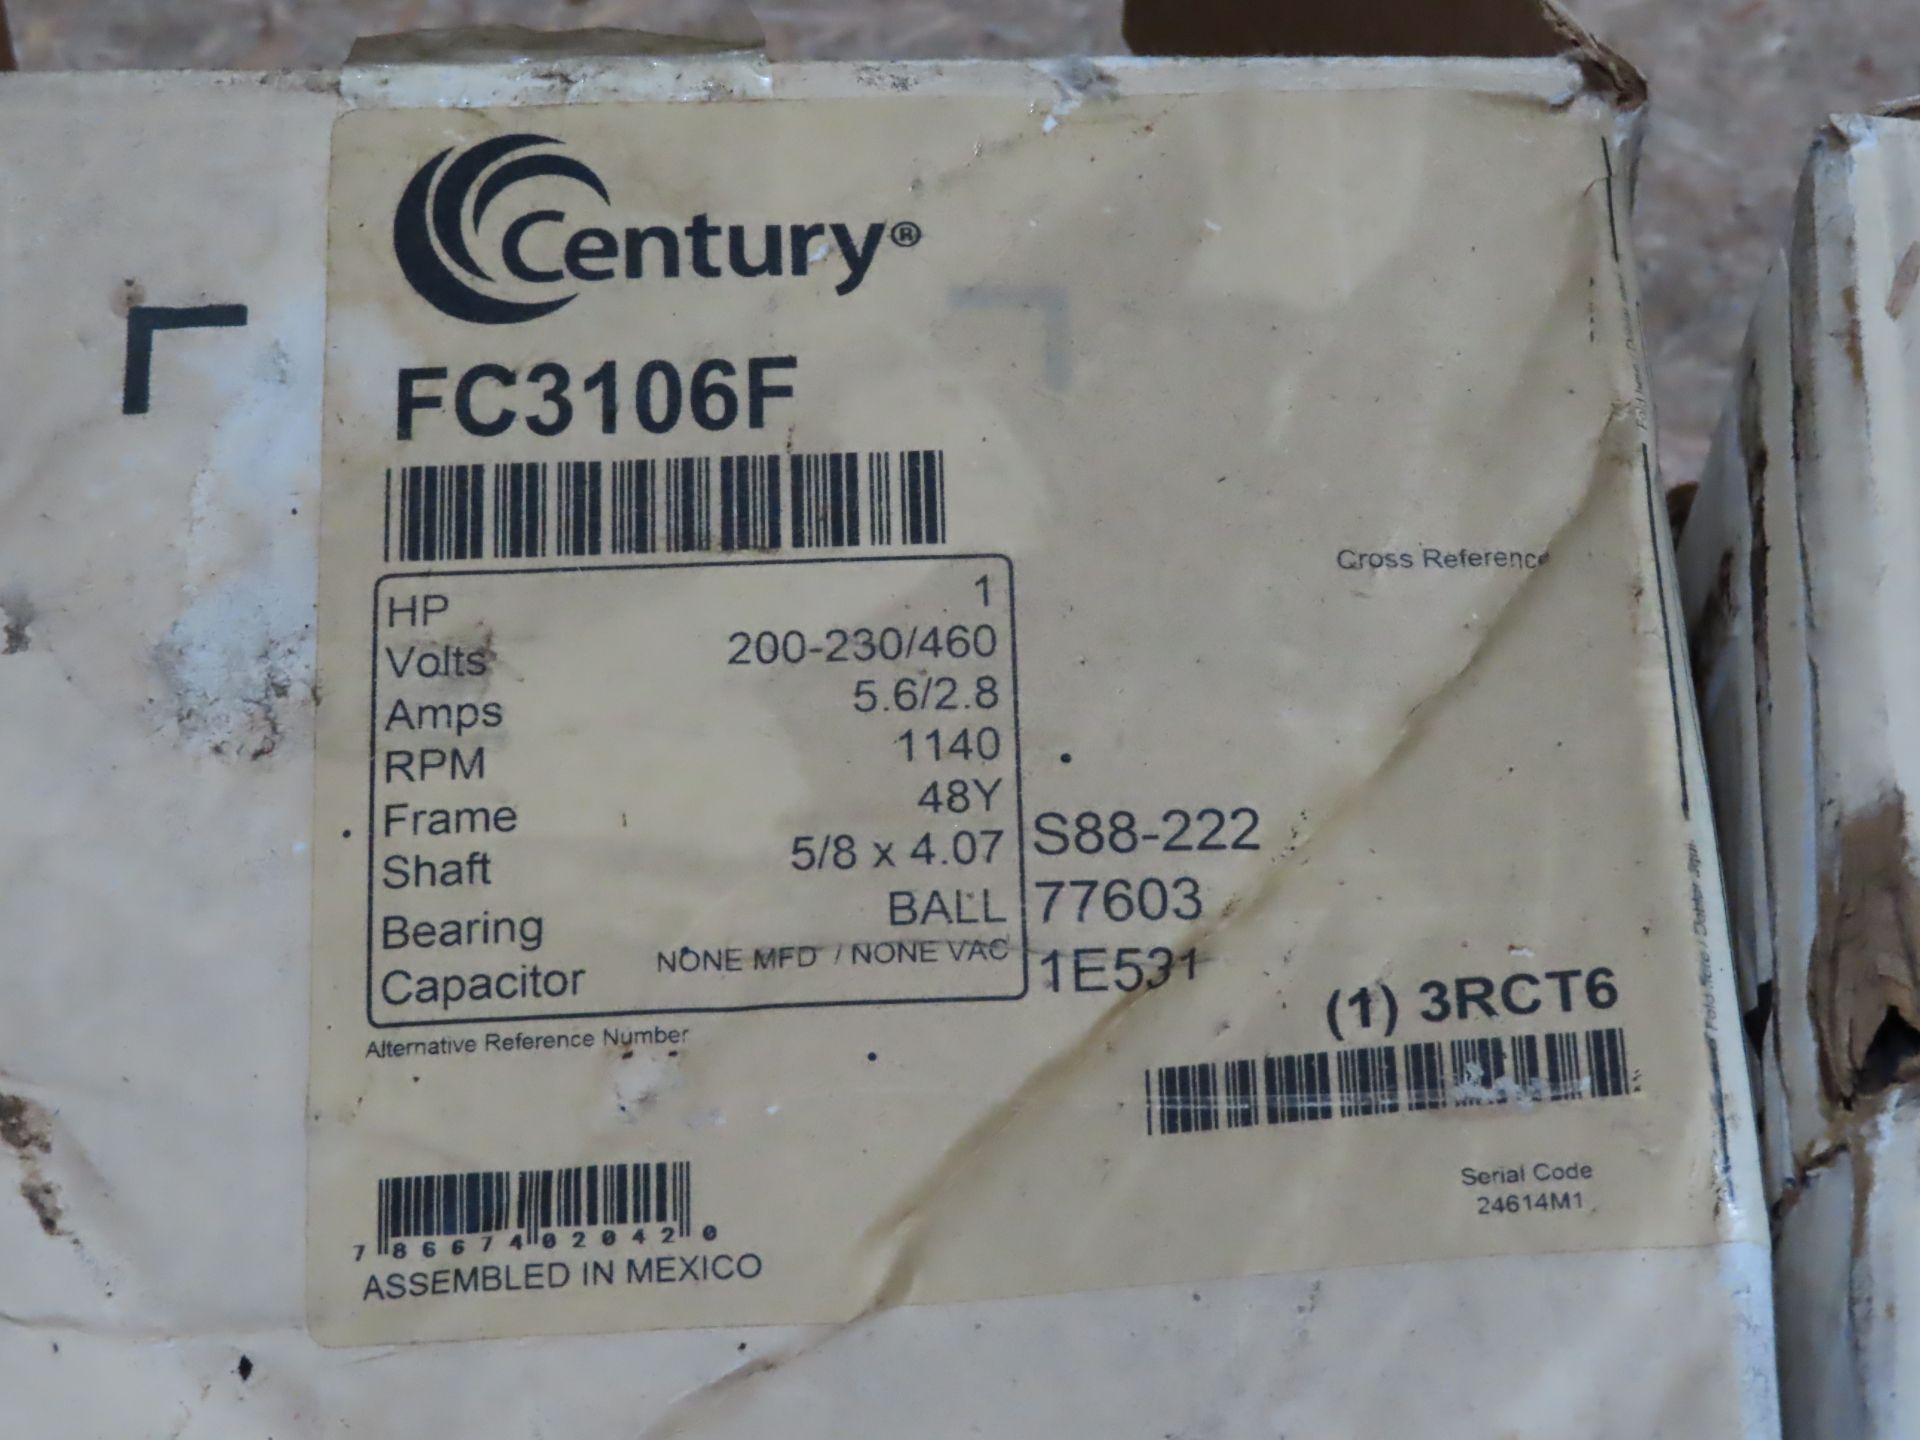 Century motor 1 hp model FC3106F, new in box, as always with Brolyn LLC auctions, all lots can be - Image 2 of 2